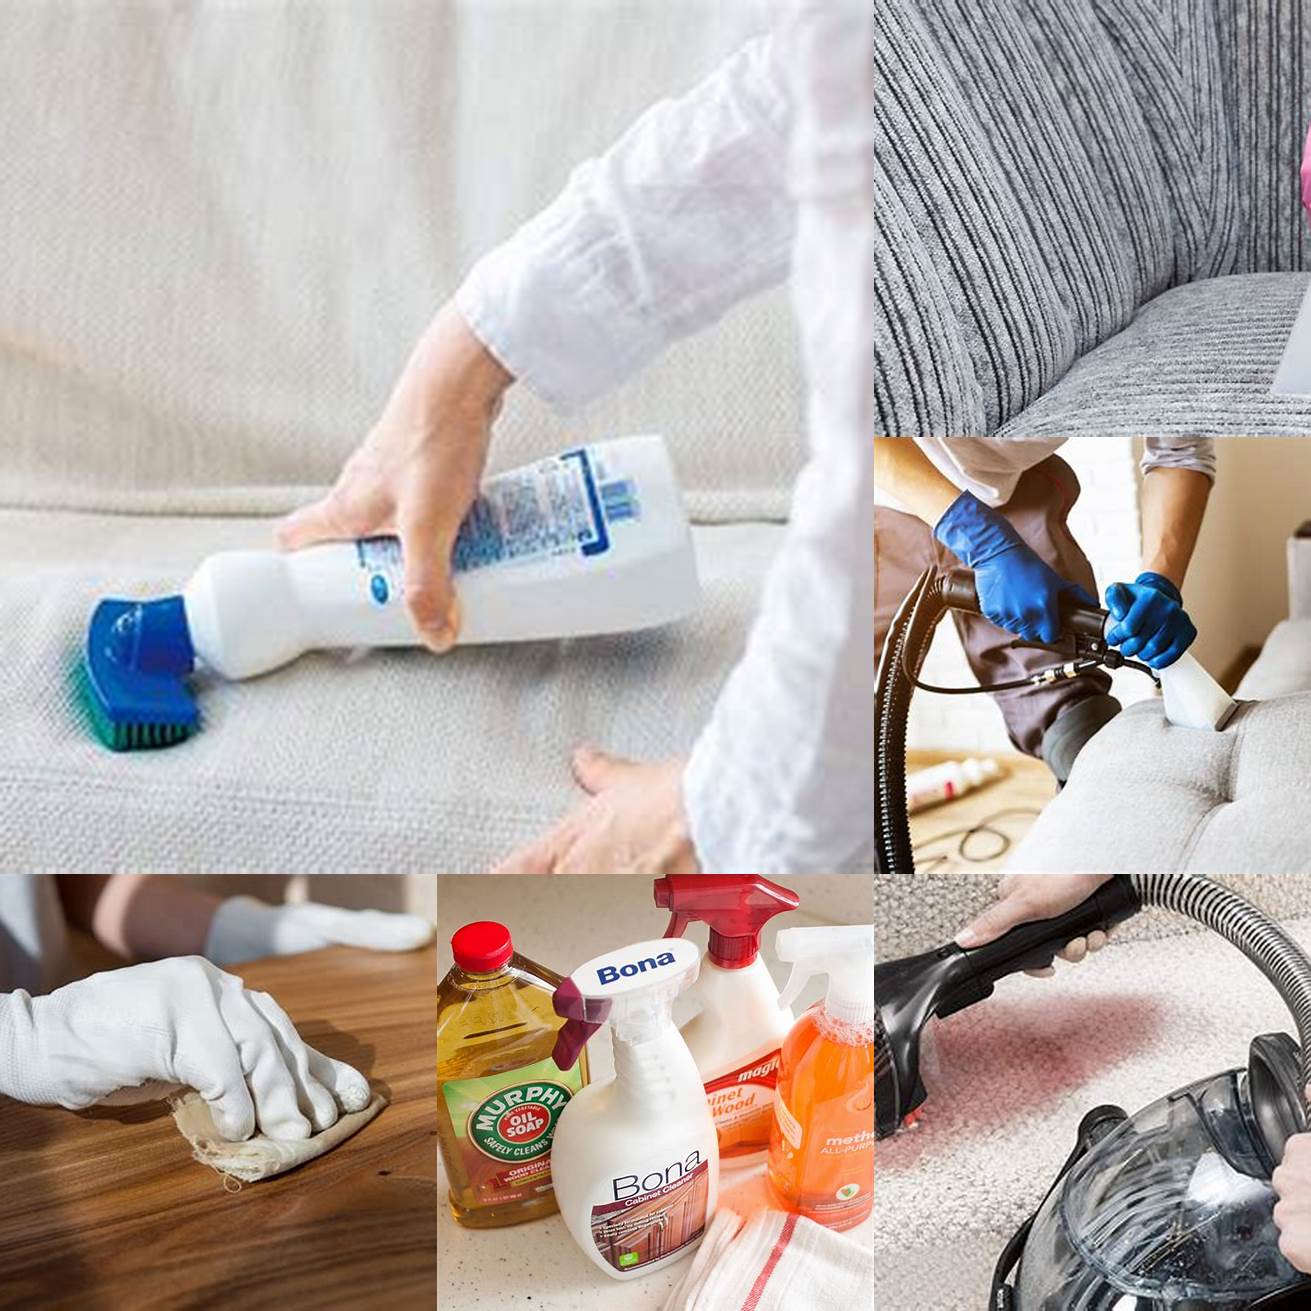 Cleaning Product Image